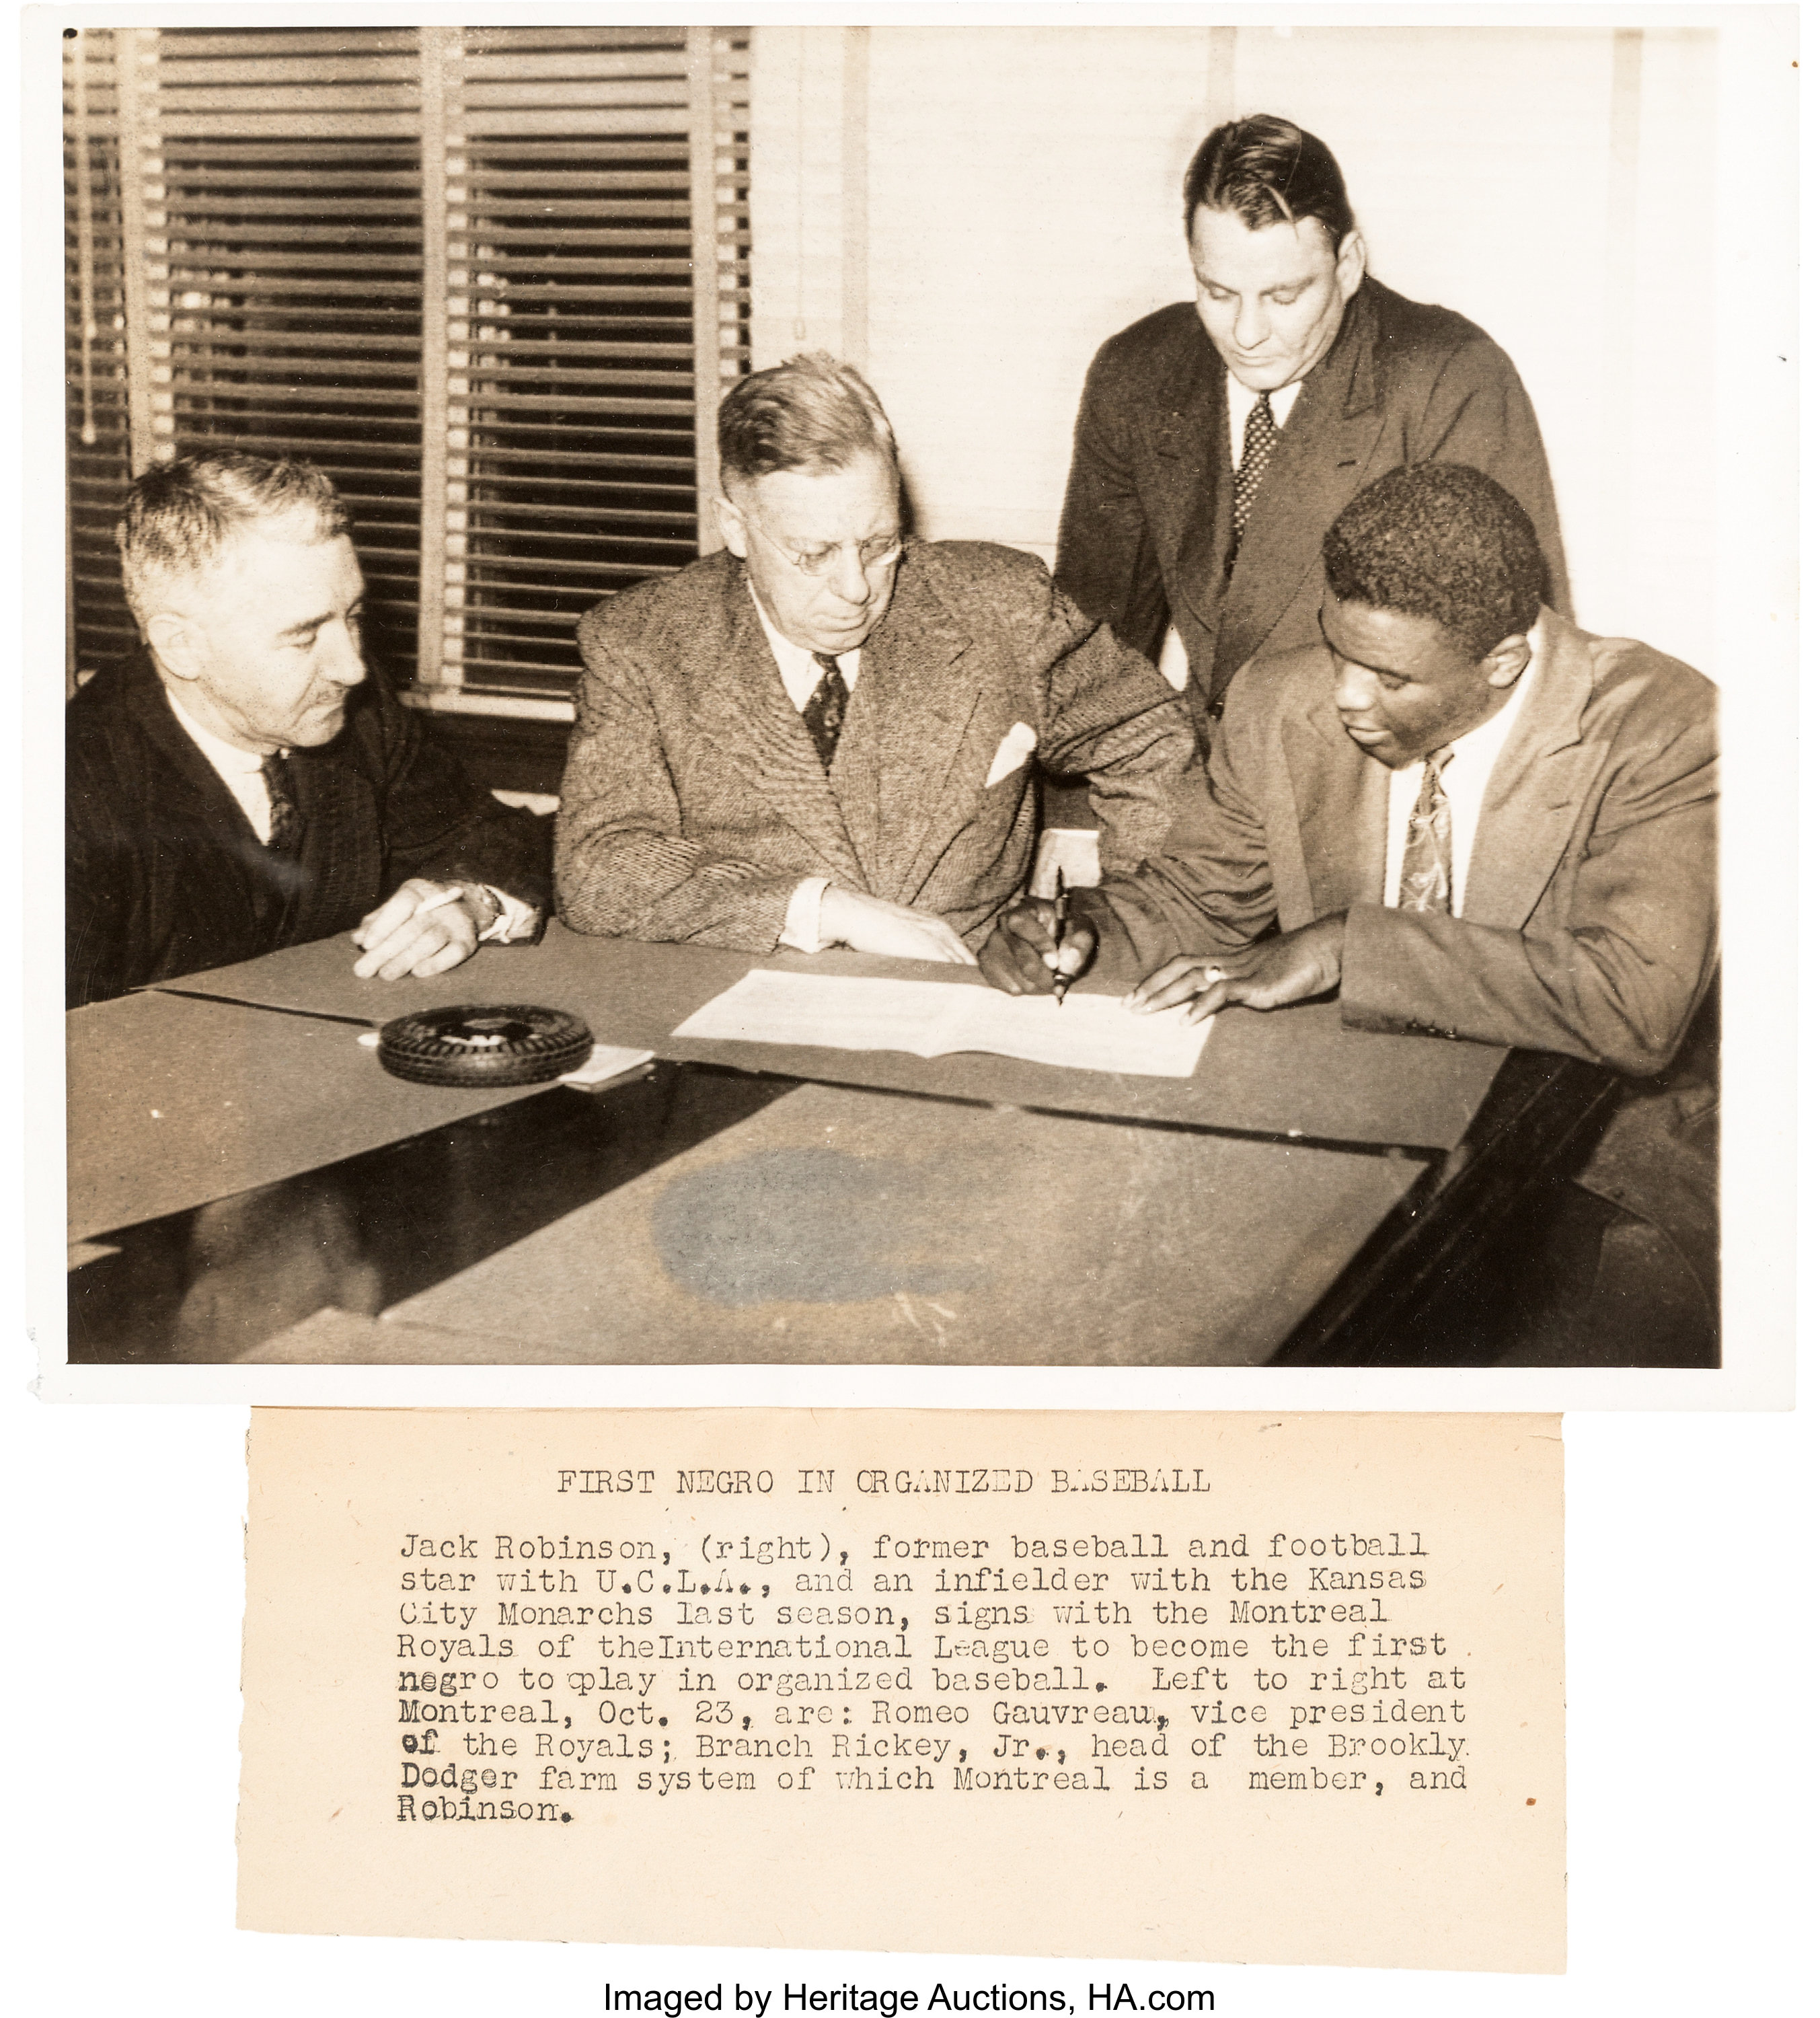 Jackie Robinson & Branch Rickey Signing Contract